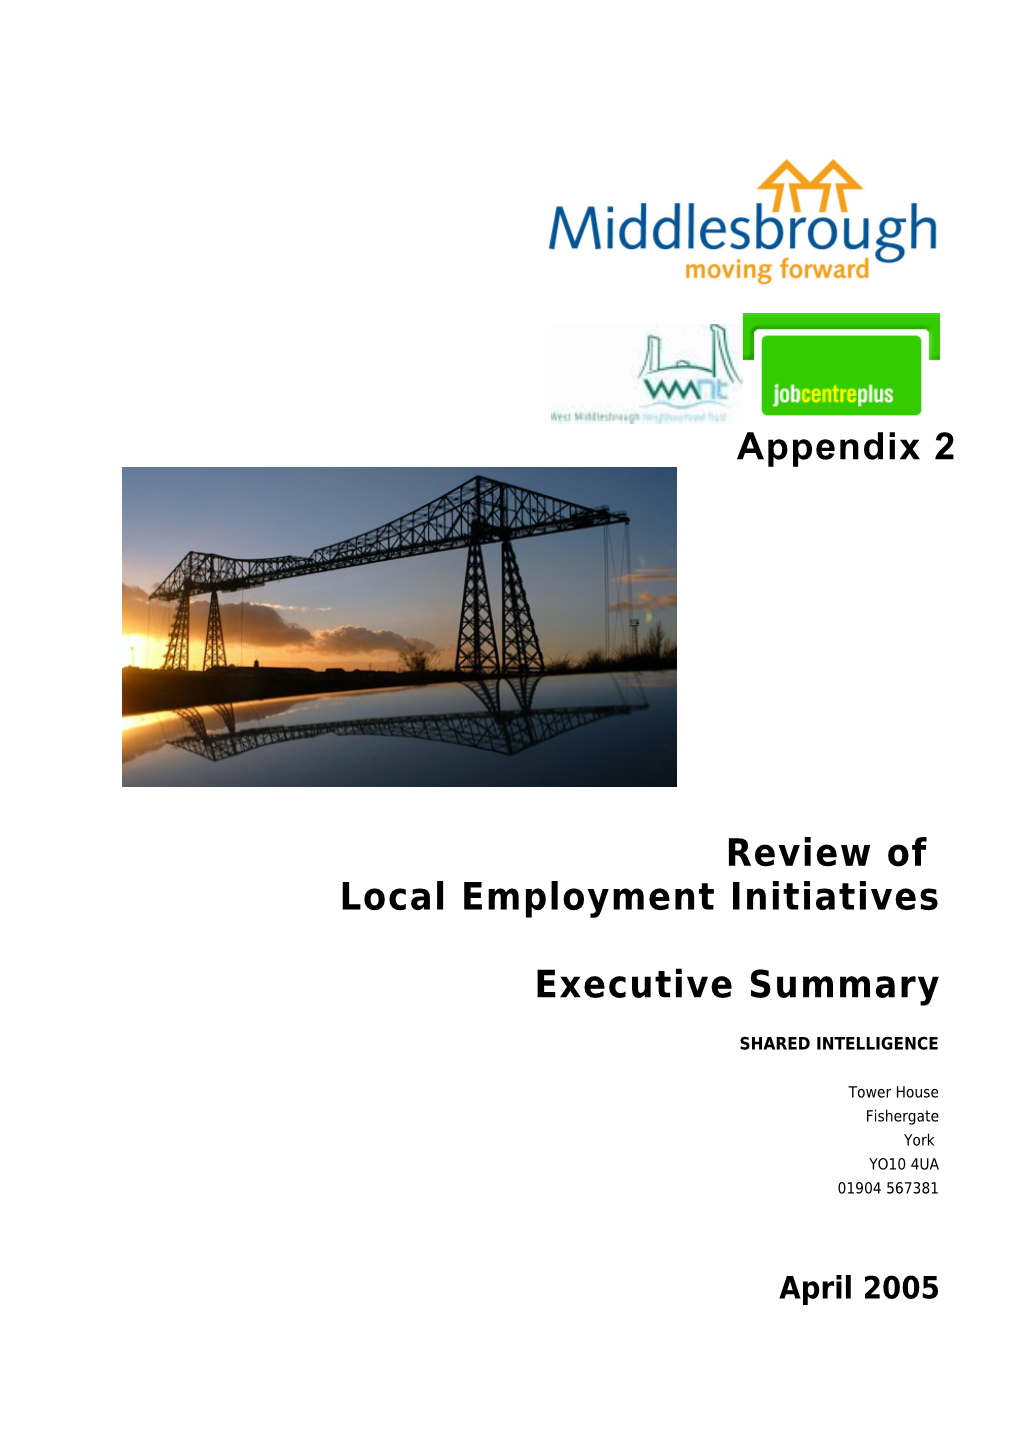 Local Employment Initiatives